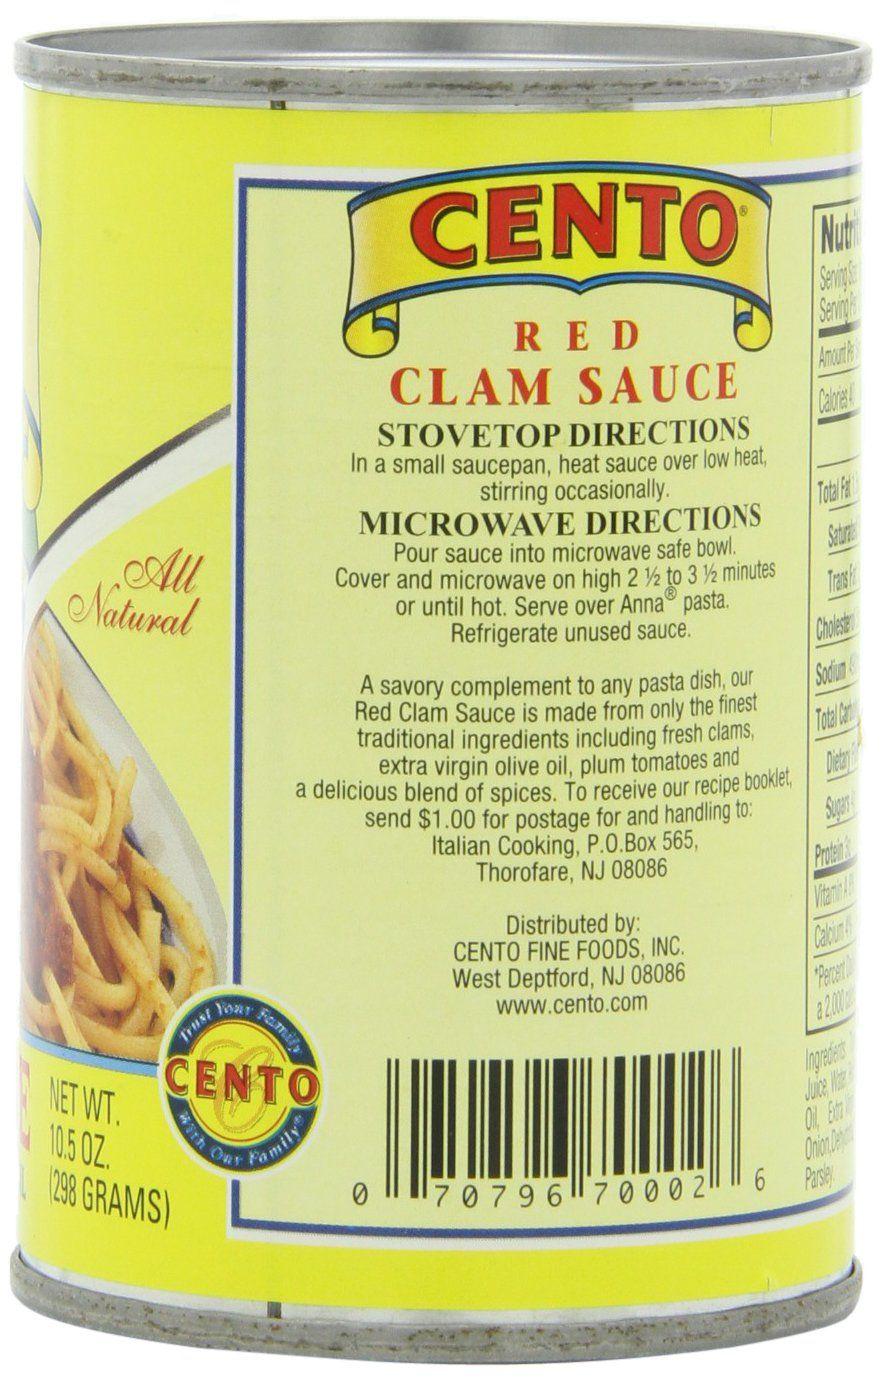 Yellow and Red Clam Logo - Amazon.com : Cento Red Clam Sauce, 10.5 Ounce Cans (Pack of 12 ...